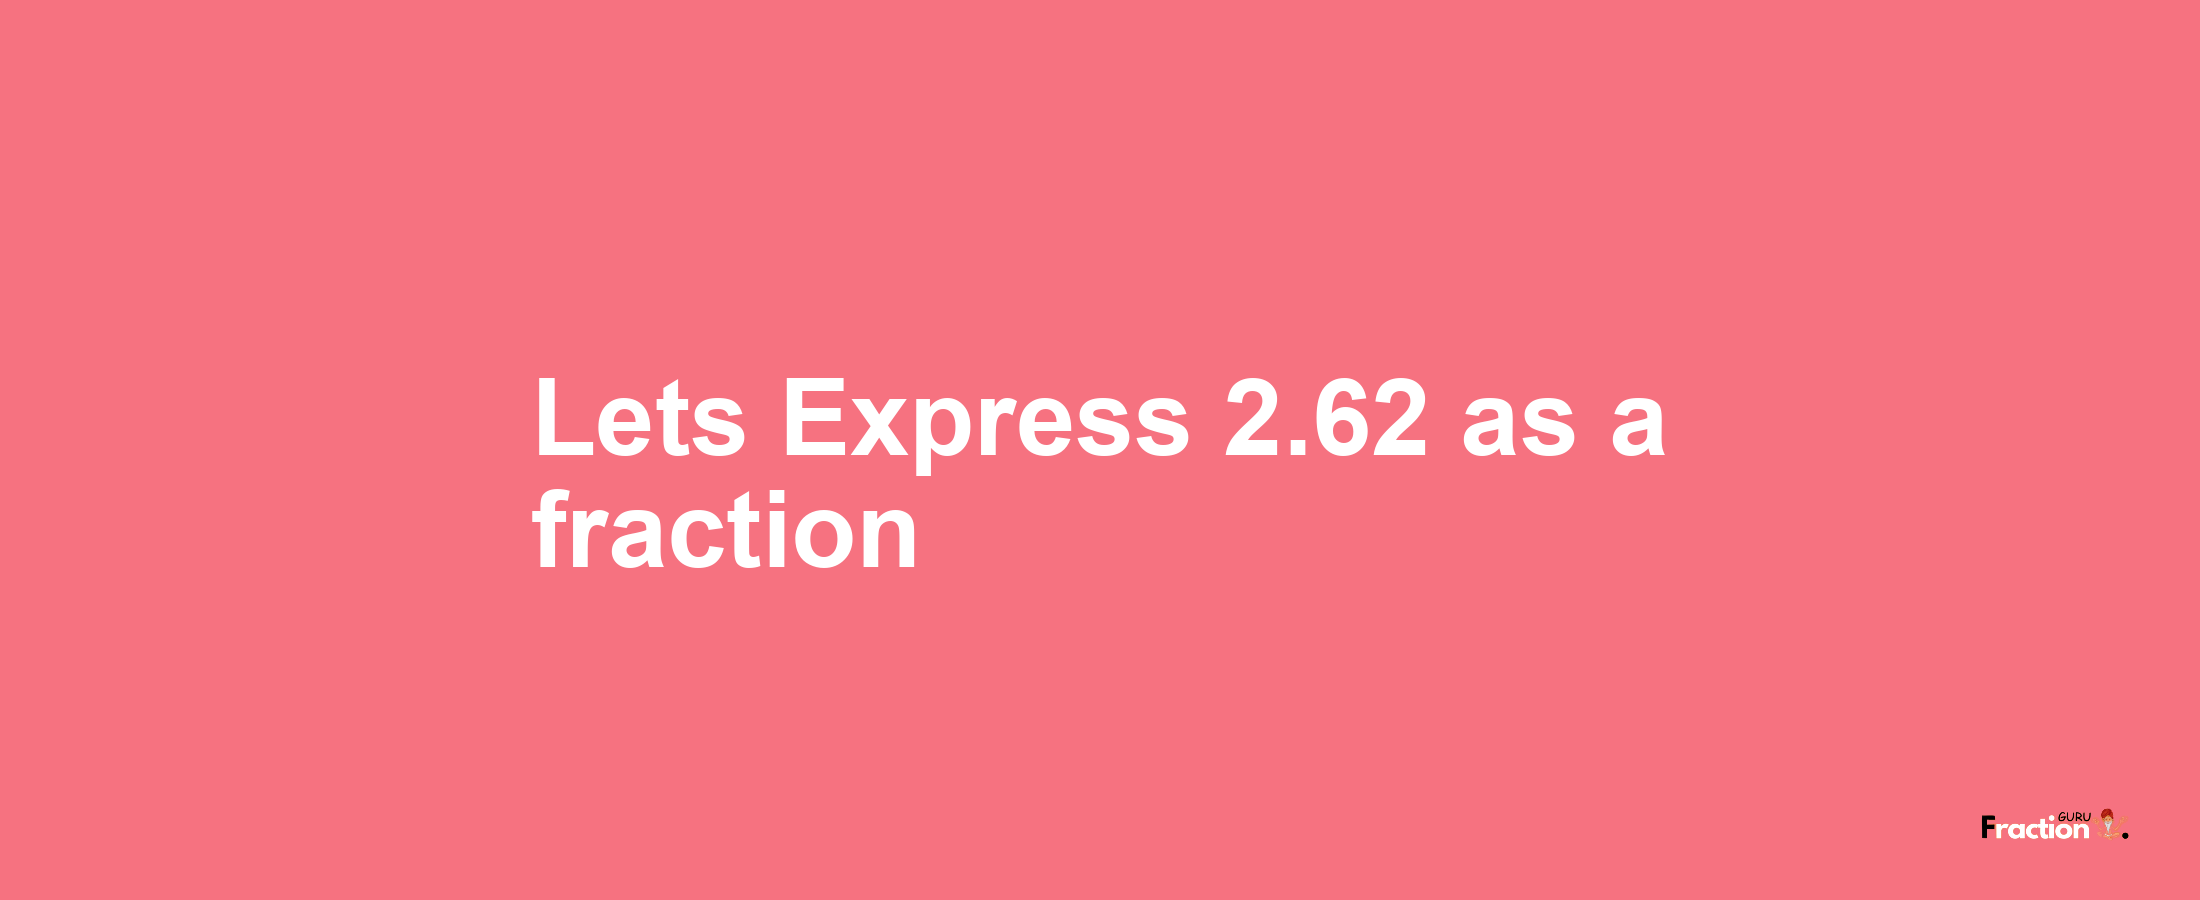 Lets Express 2.62 as afraction